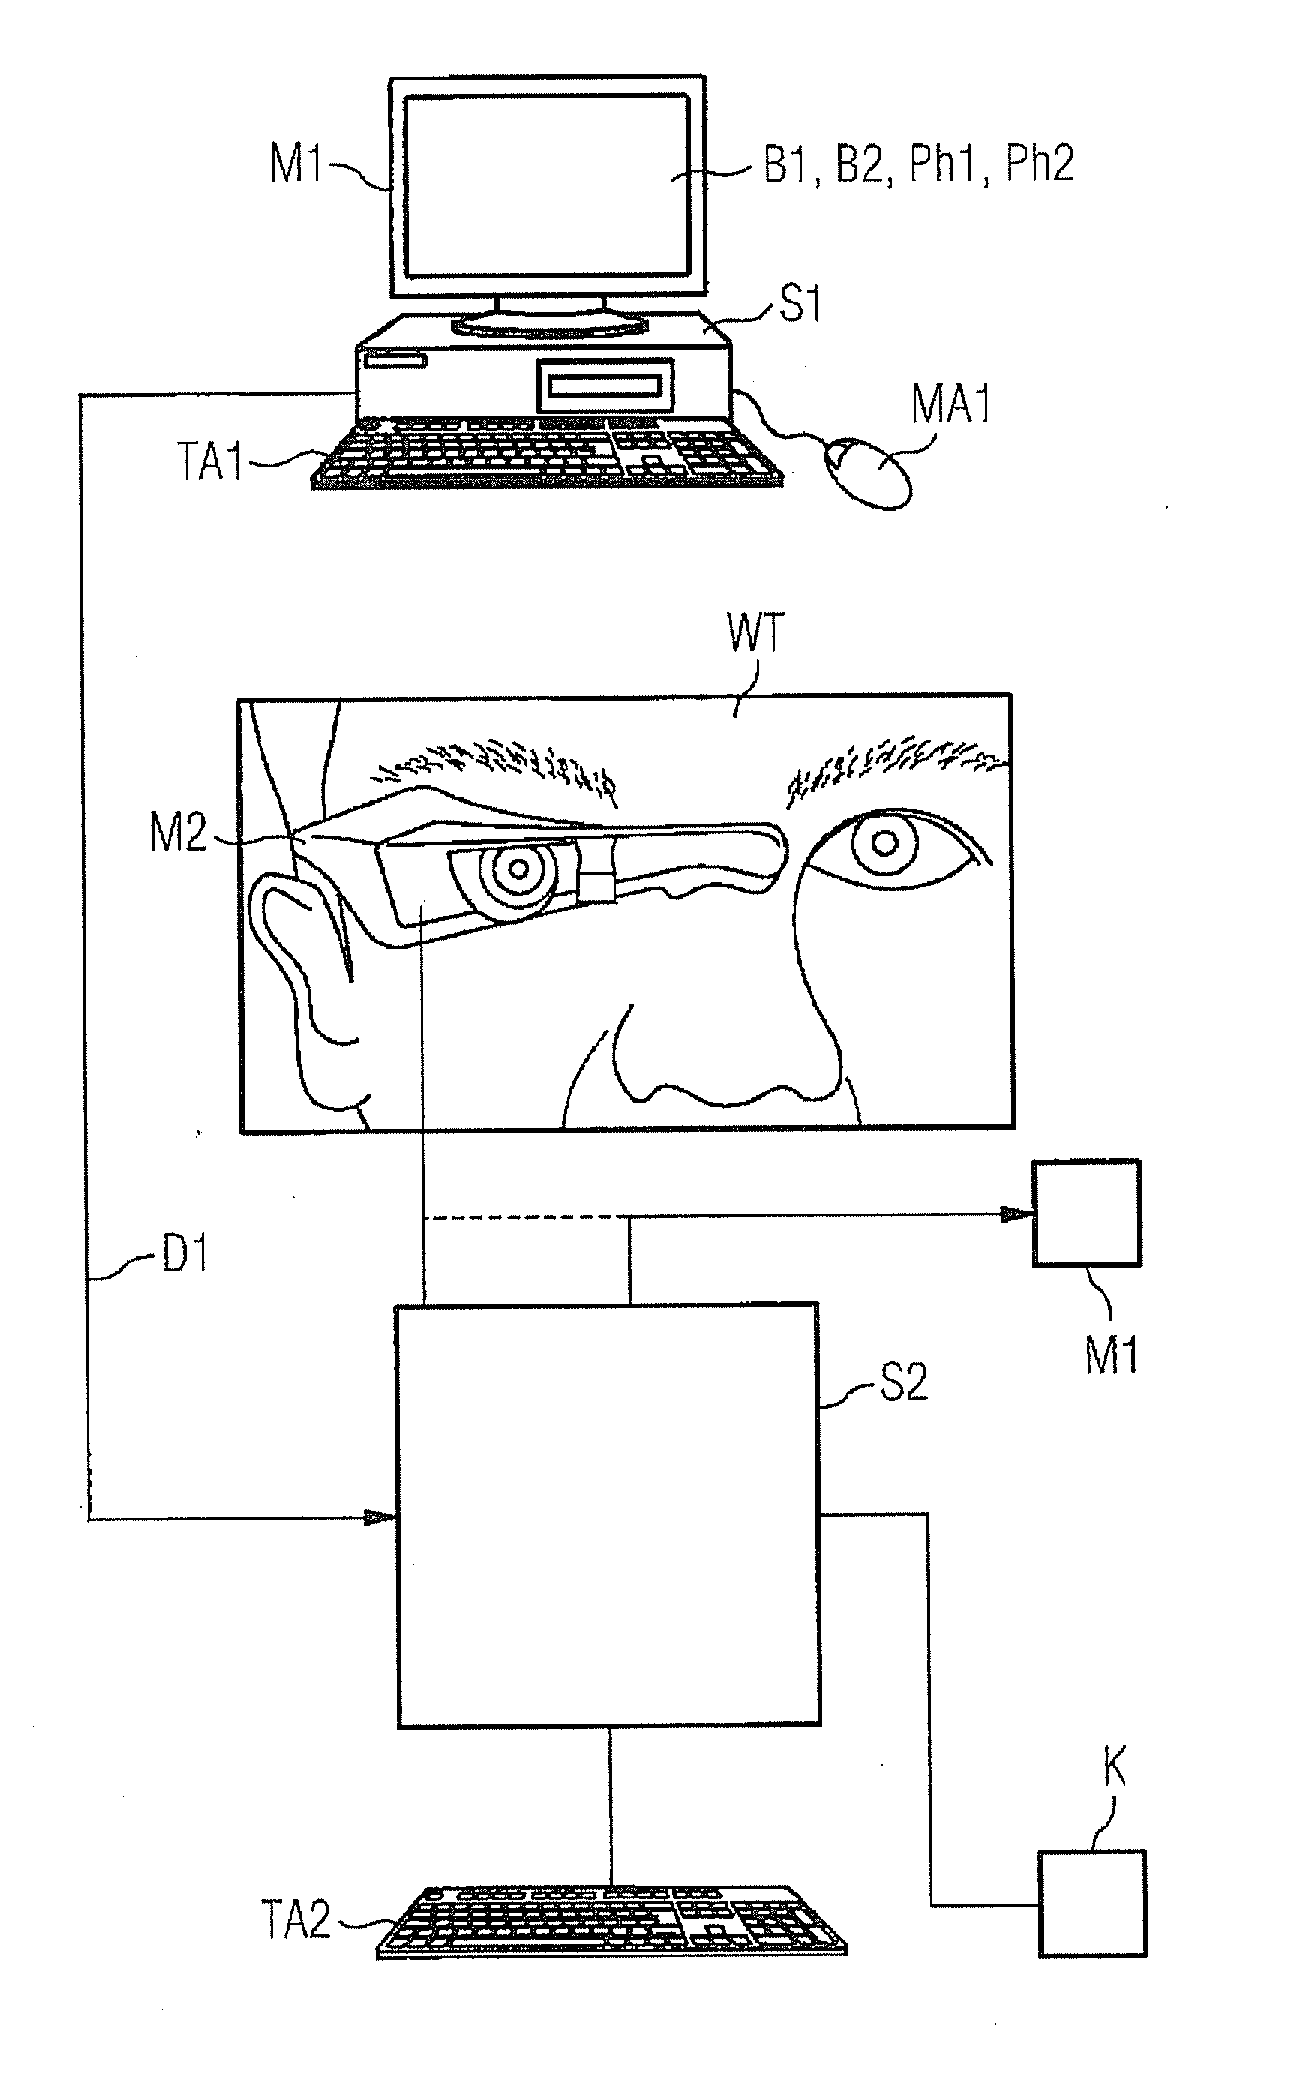 Method for transmitting an image from a first control unit to a second control unit and output unit